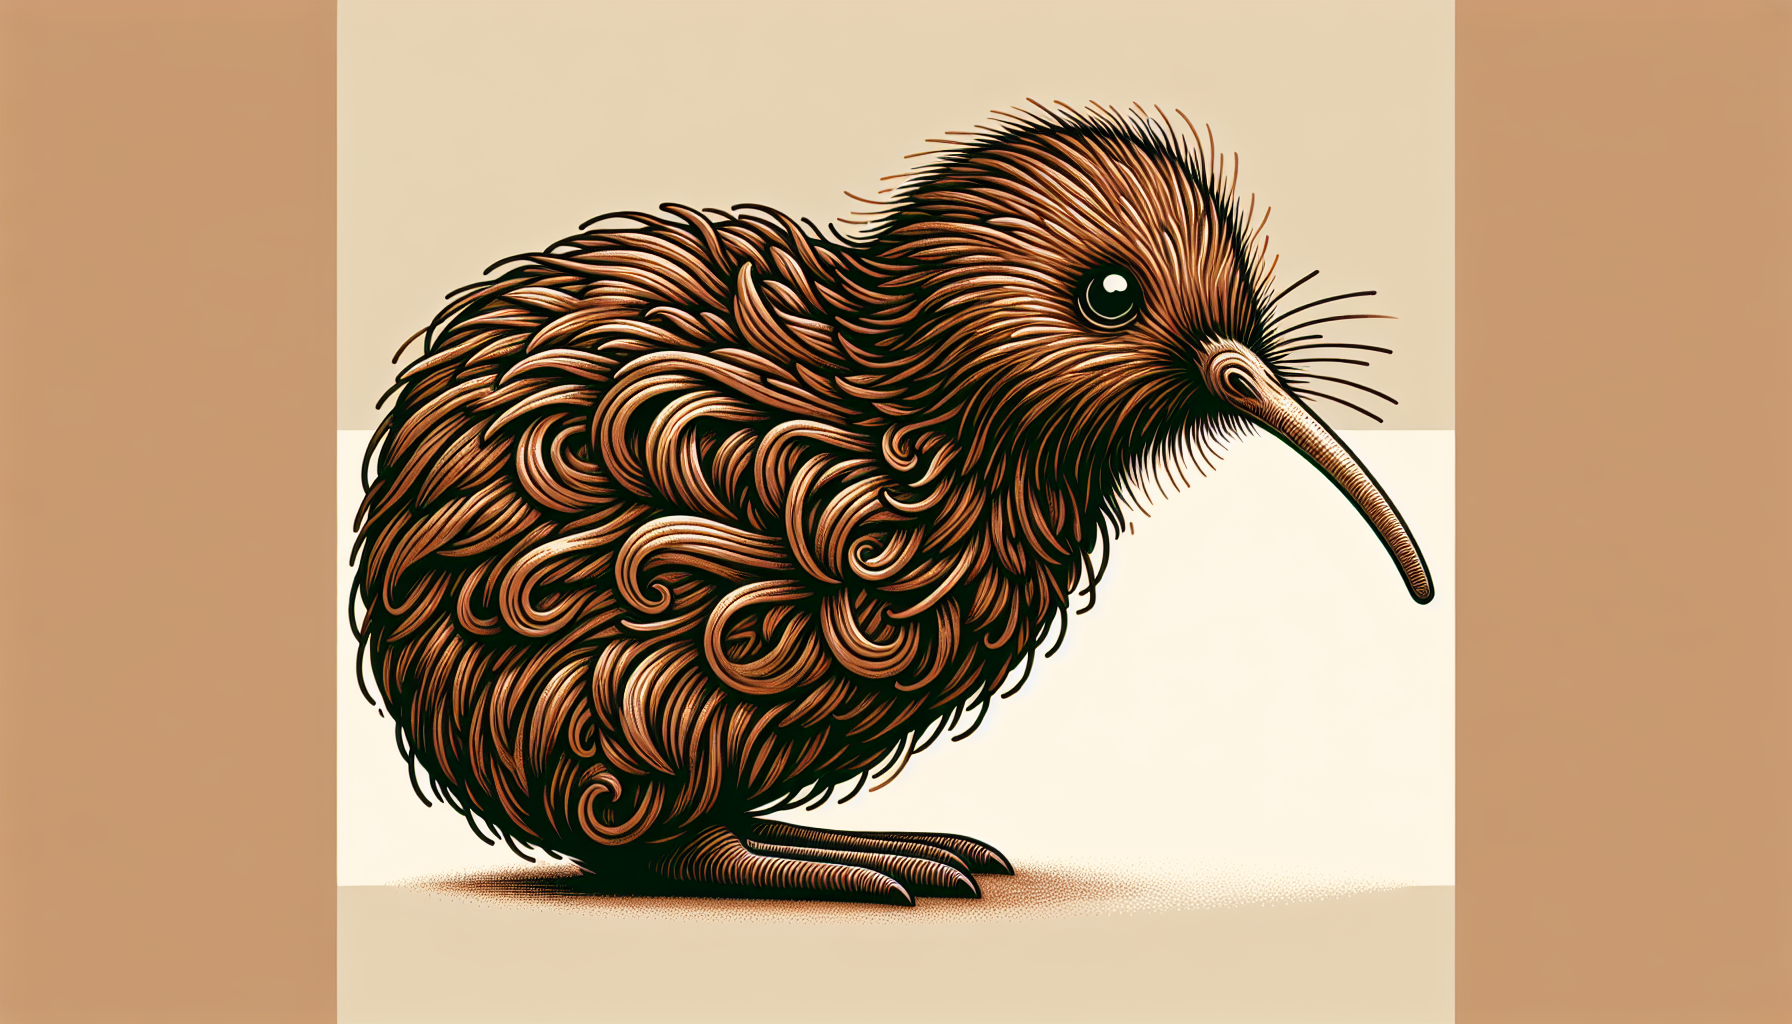 Illustration of a brown kiwi with its distinctive long bill and shaggy feathers